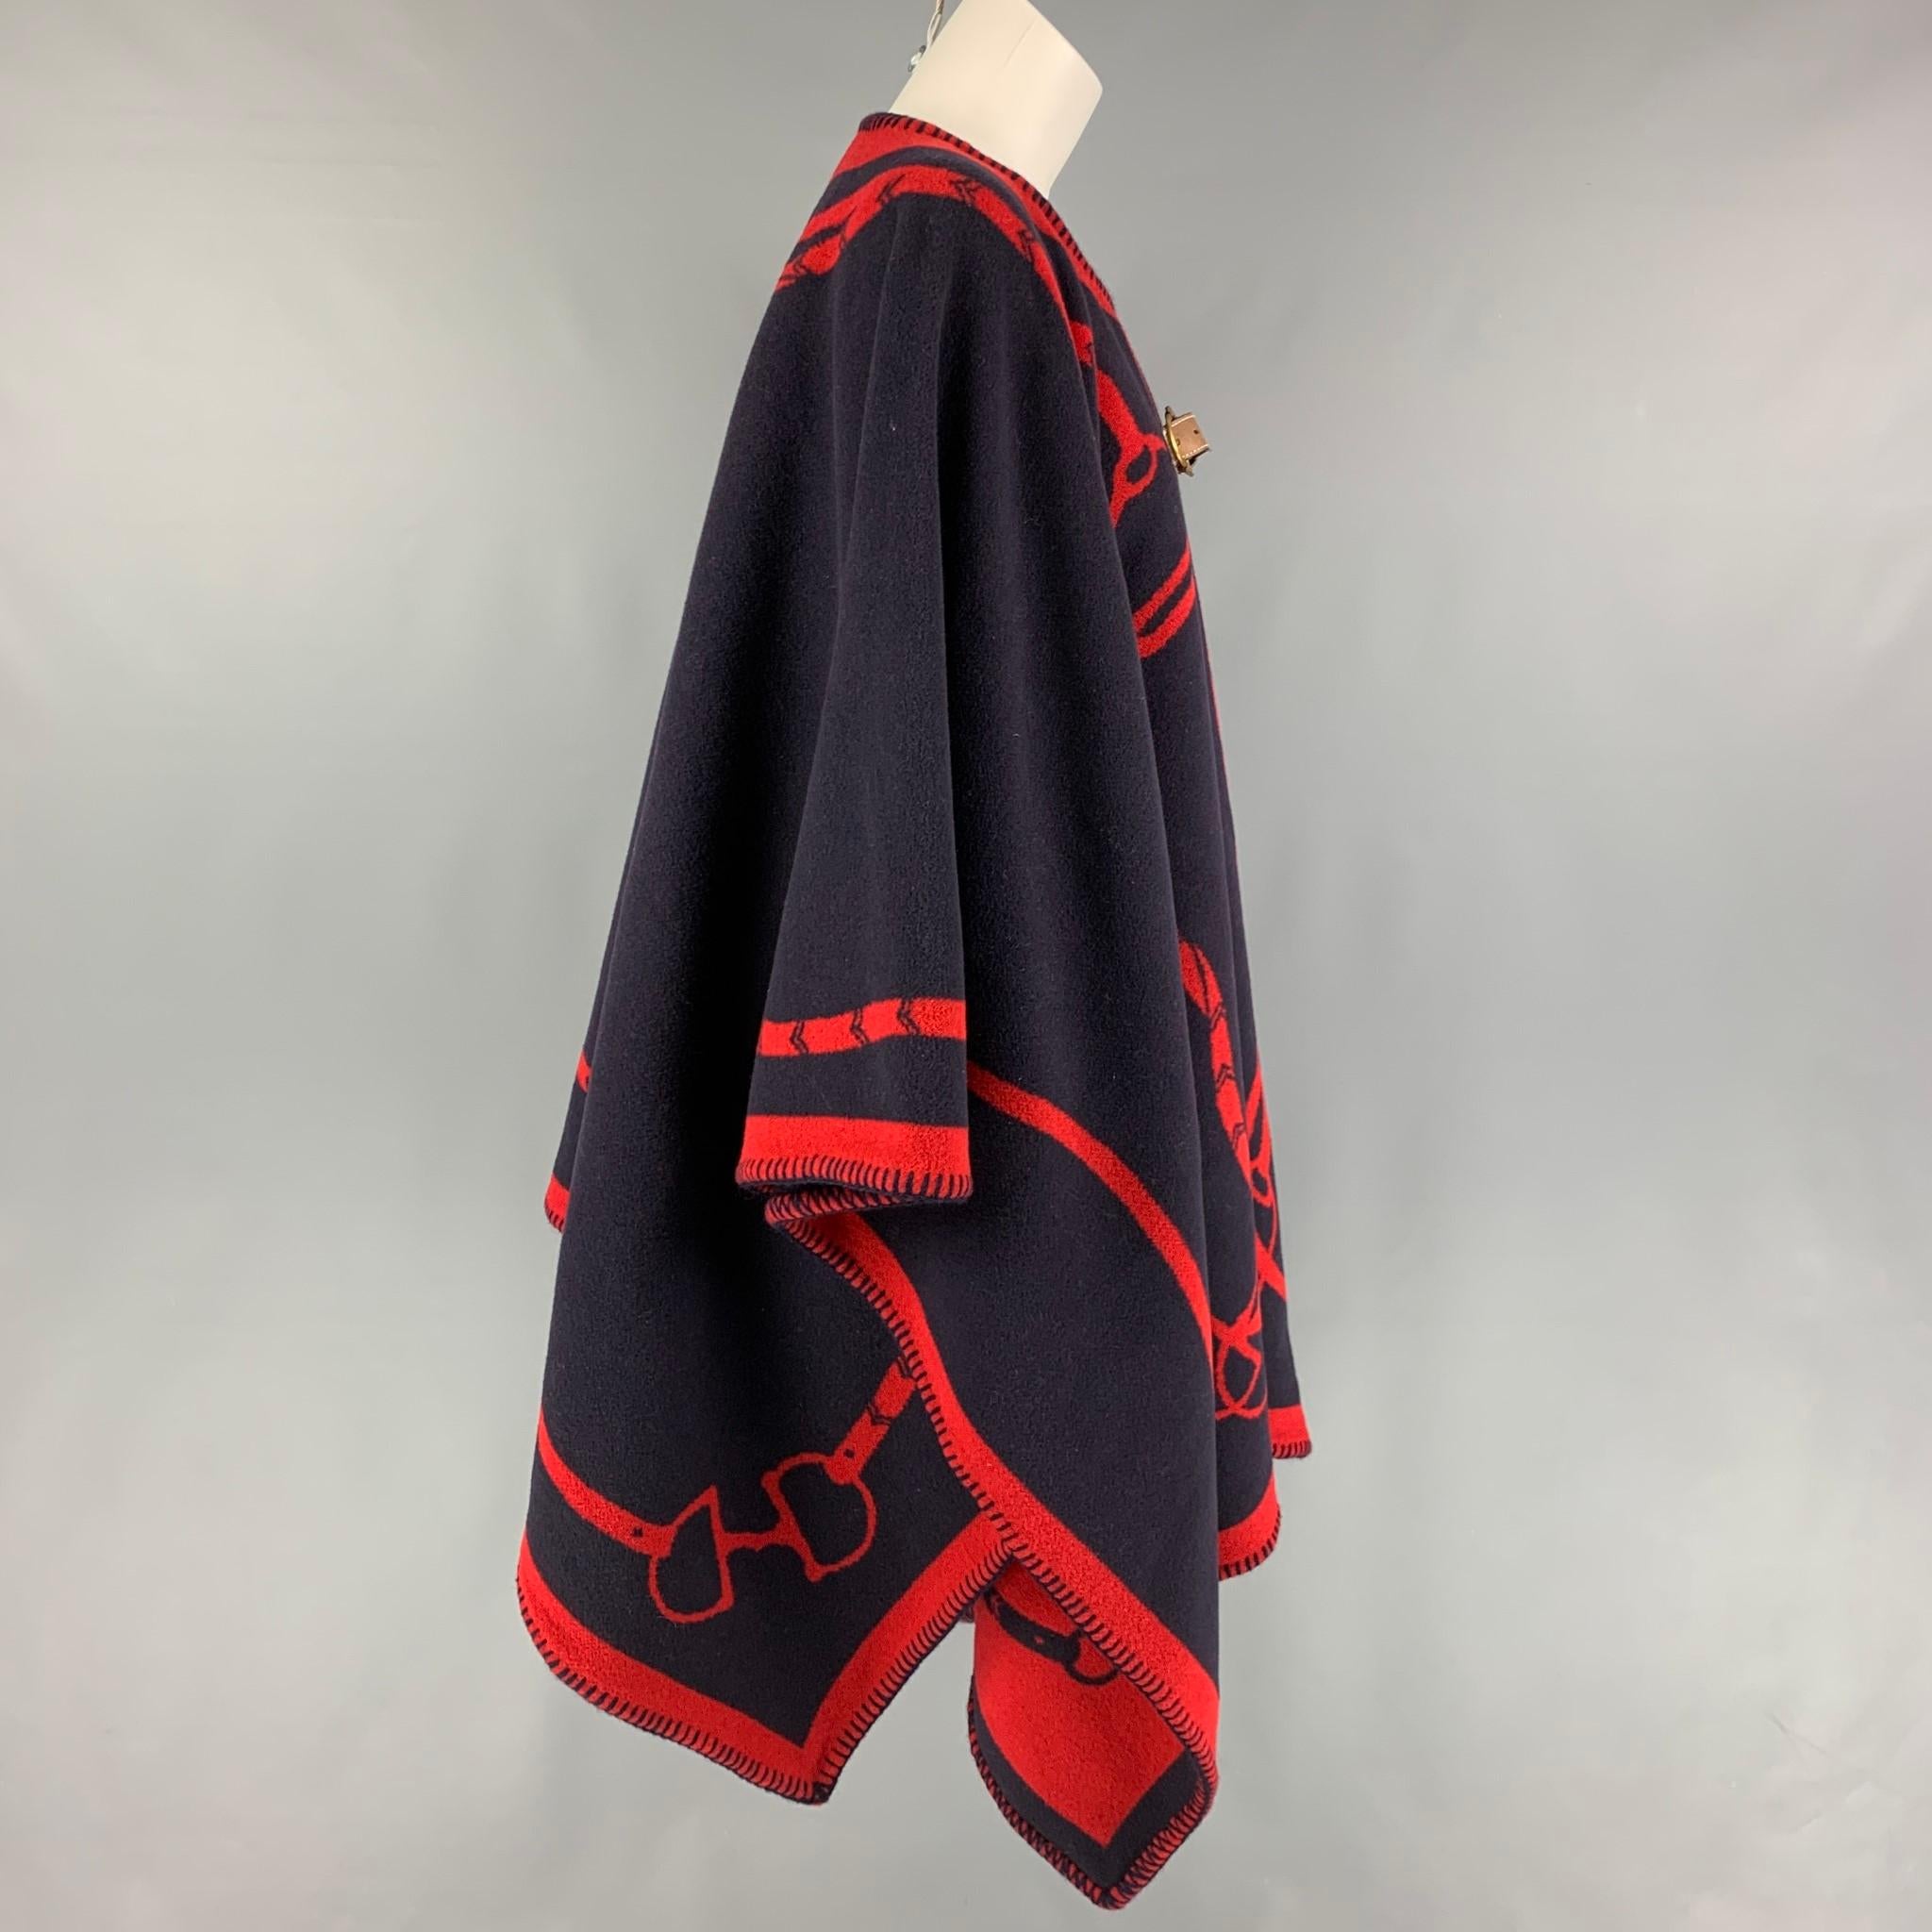 RALPH LAUREN cape comes in a navy & red wool featuring a equestrian print design and a leather strap closure. 

Very Good Pre-Owned Condition.
Marked: One Size

Measurements:

Length: 44 in. 